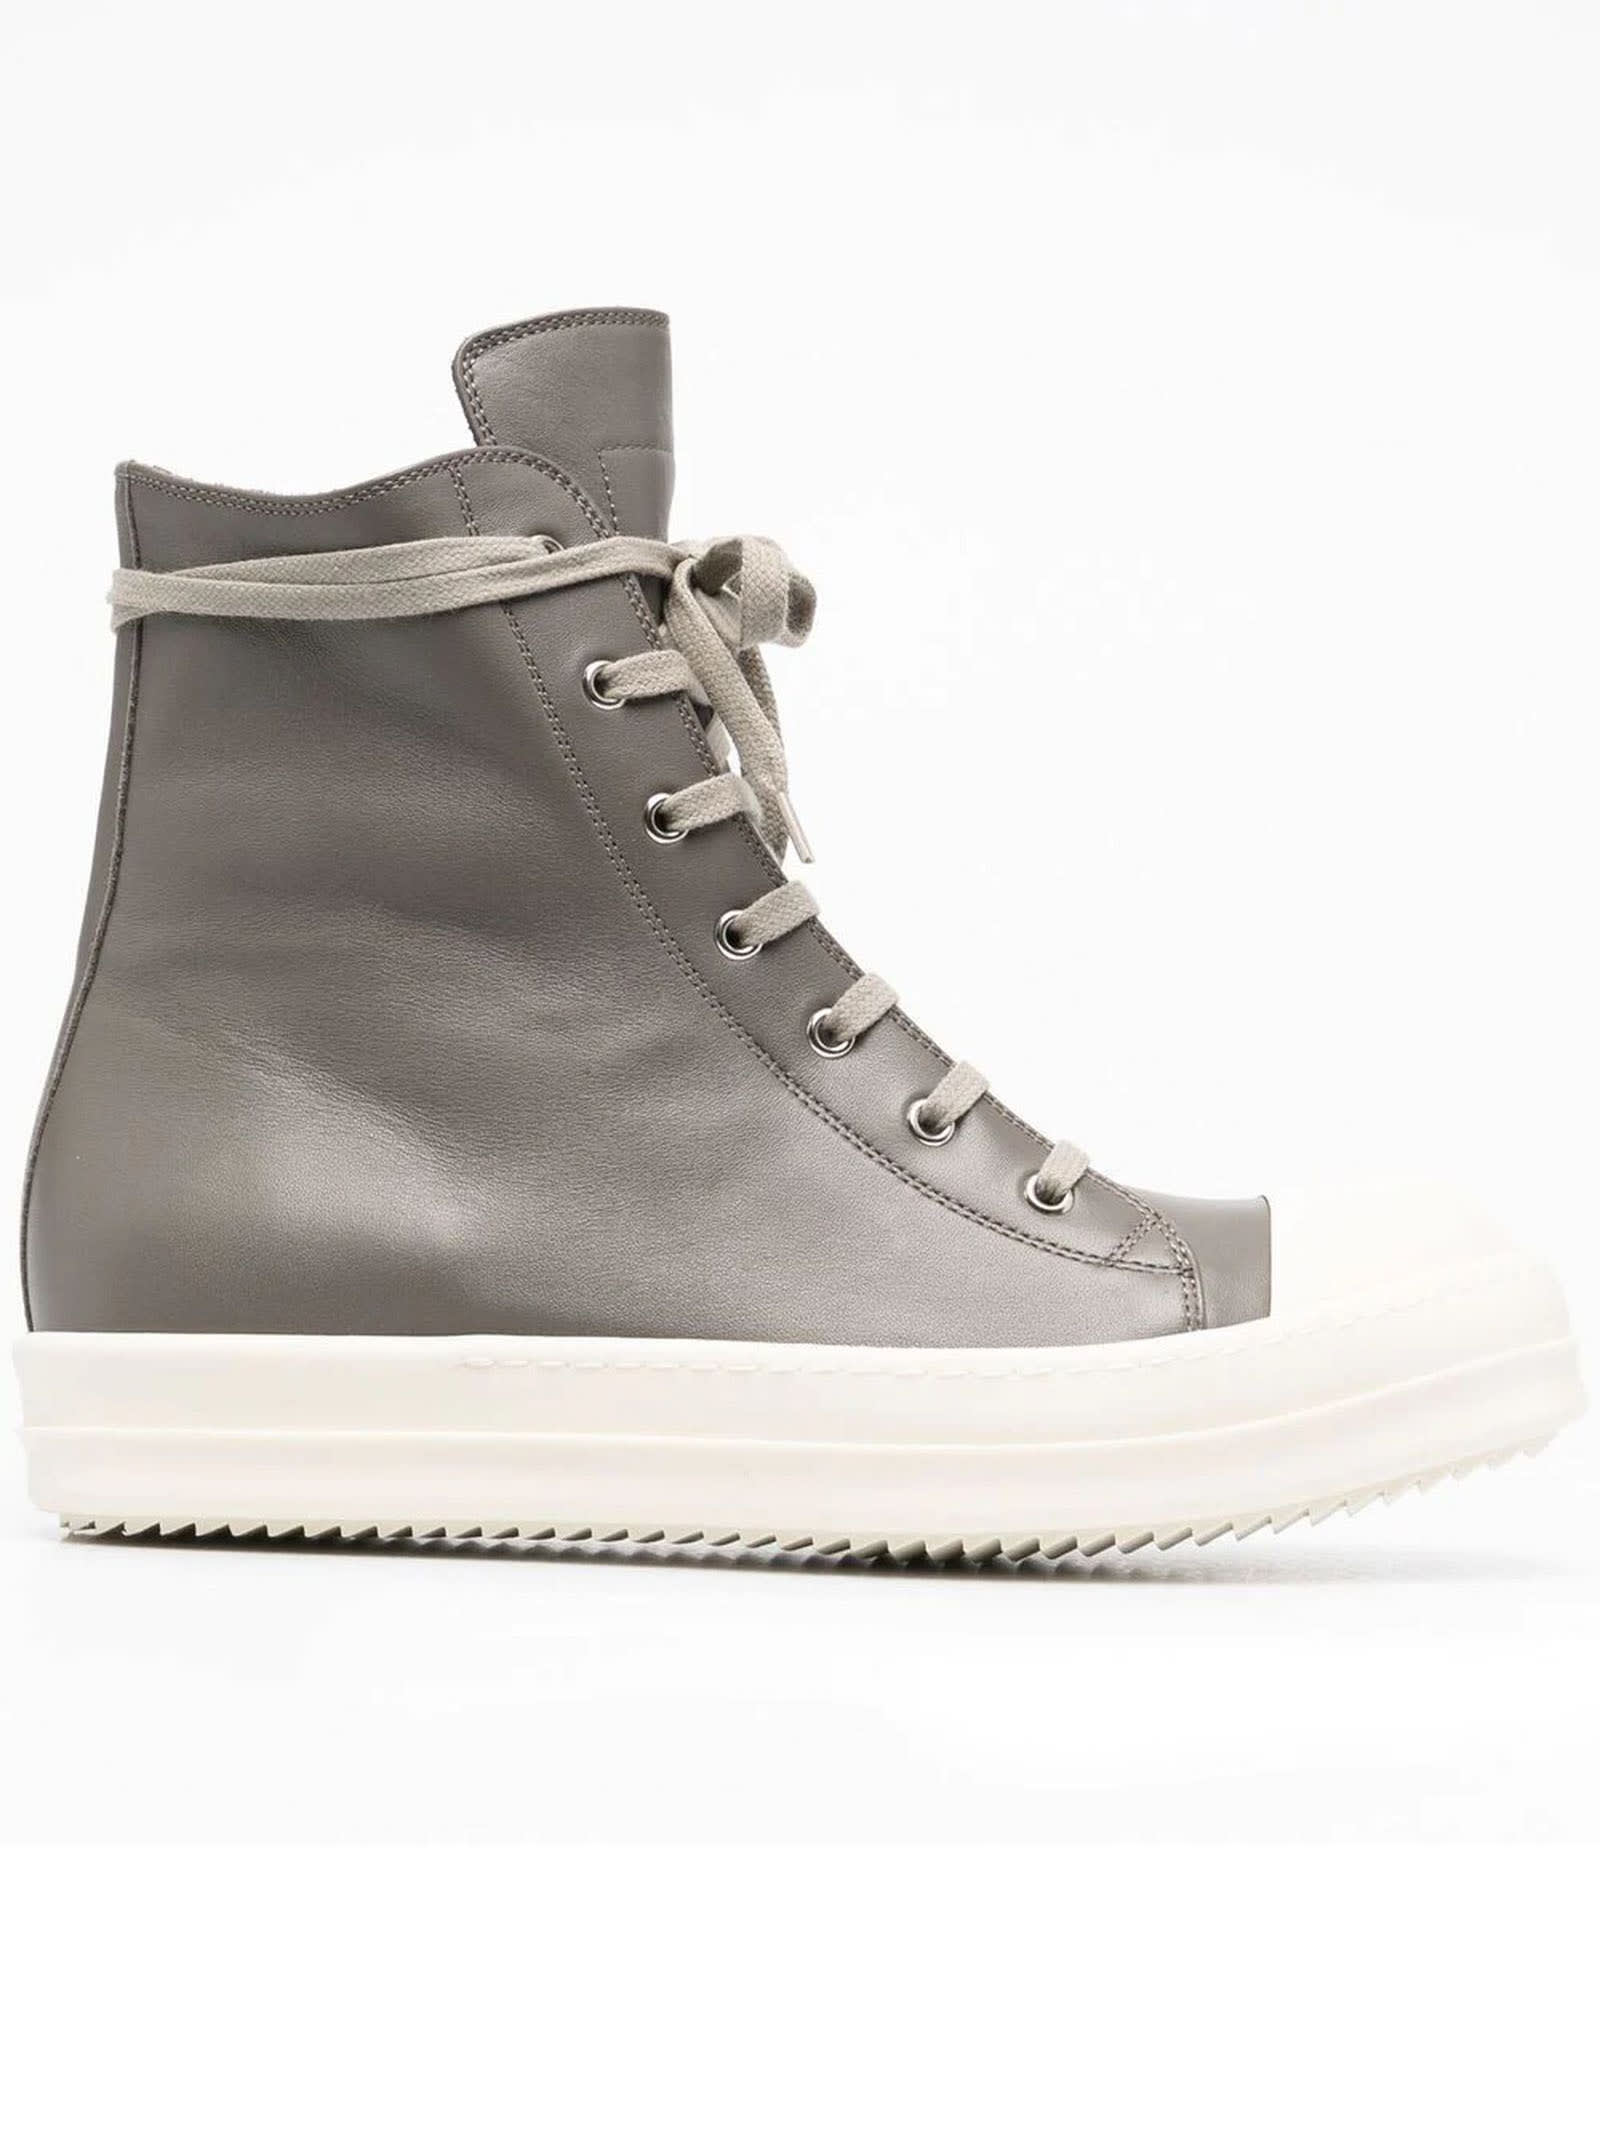 RICK OWENS GREY LEATHER HI-TOP trainers,11872398